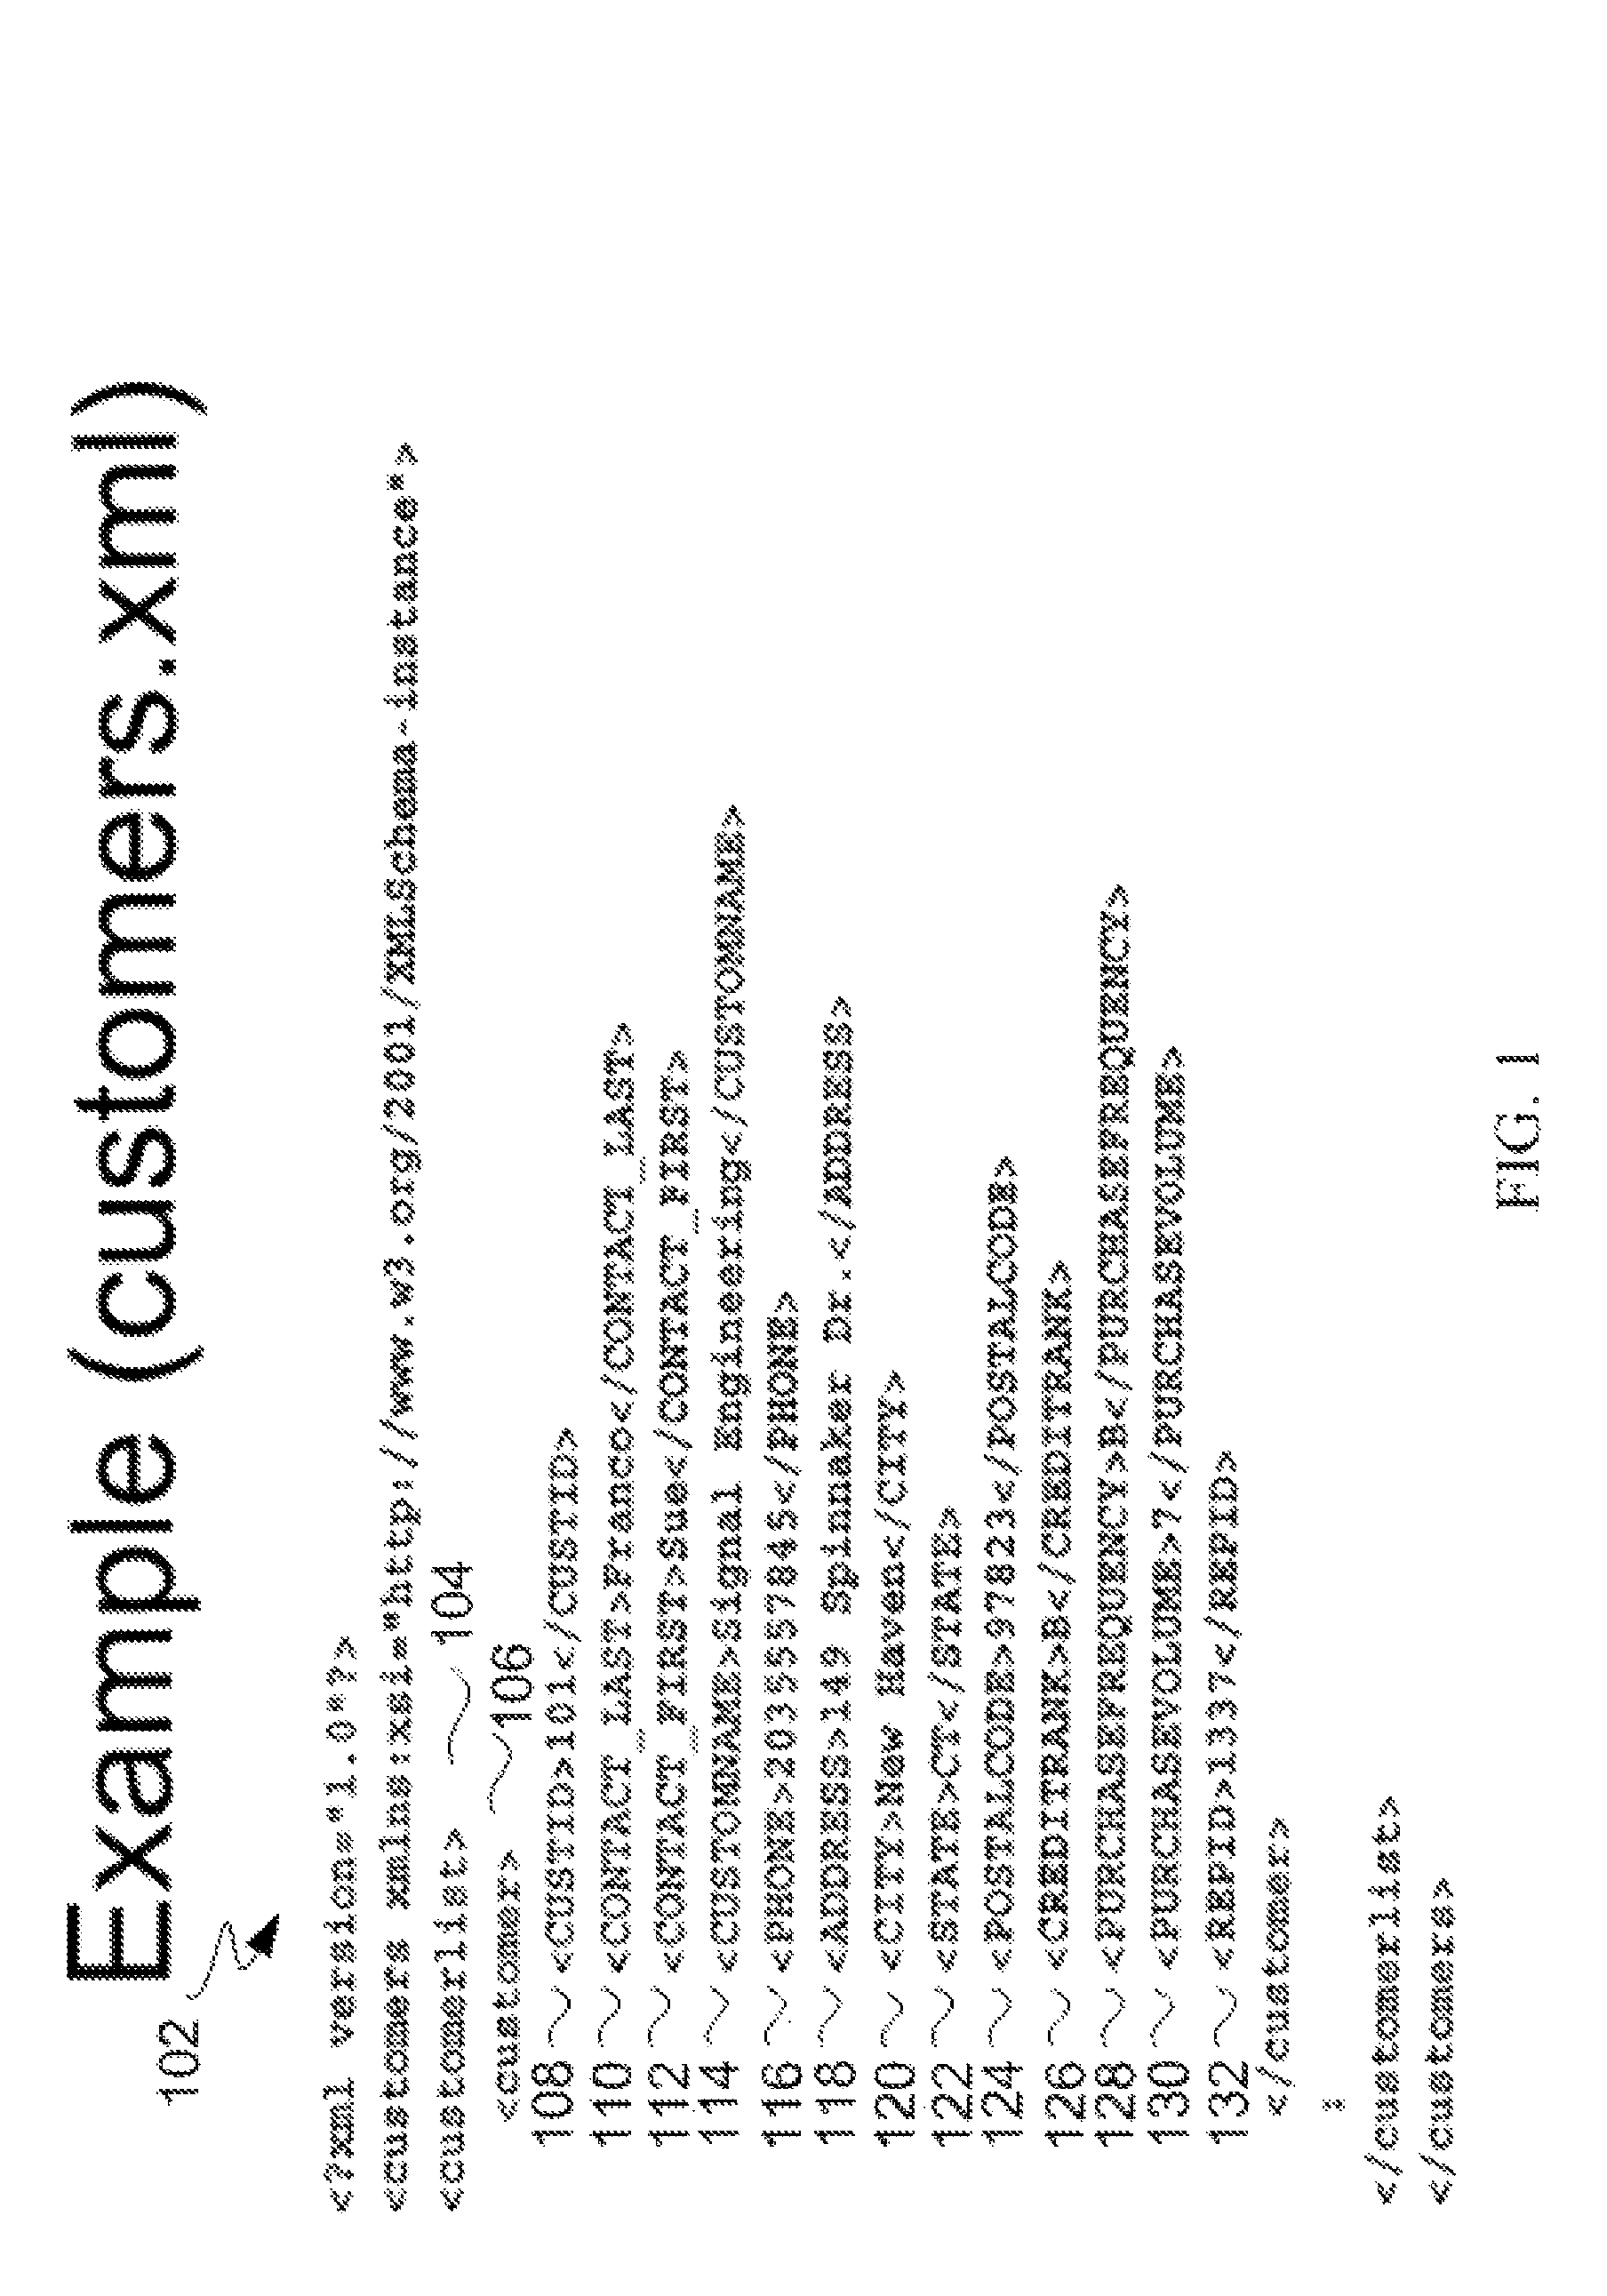 Methods and apparatus for mapping a hierarchical data structure to a flat data structure for use in generating a report